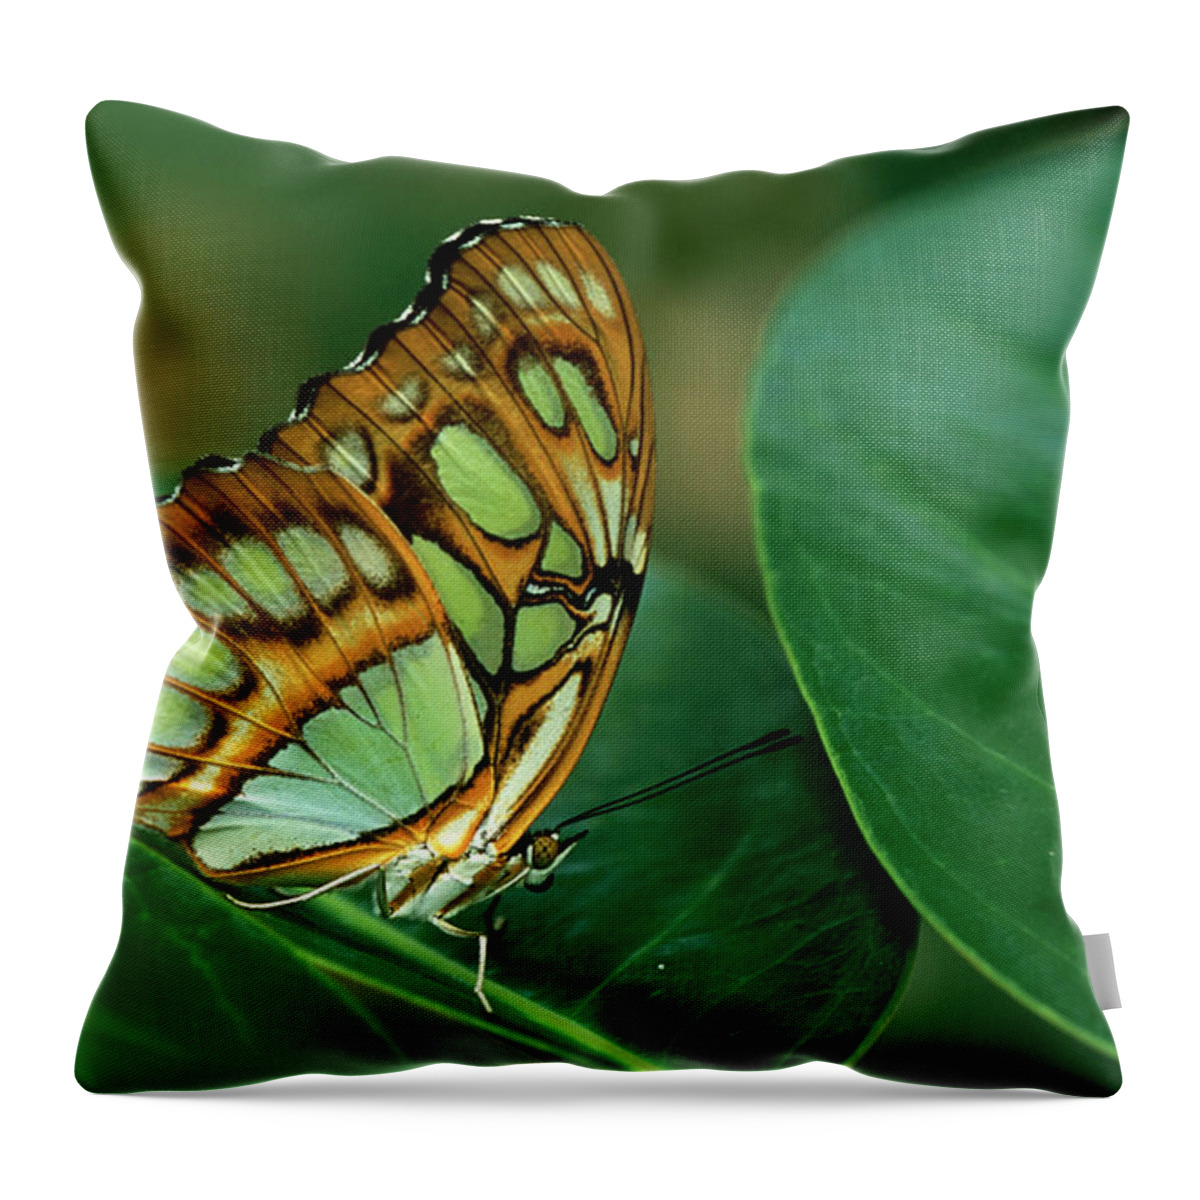 Nymphalidae Throw Pillow featuring the photograph Malachite Butterfly, Siproeta Stelenes by Adam Jones